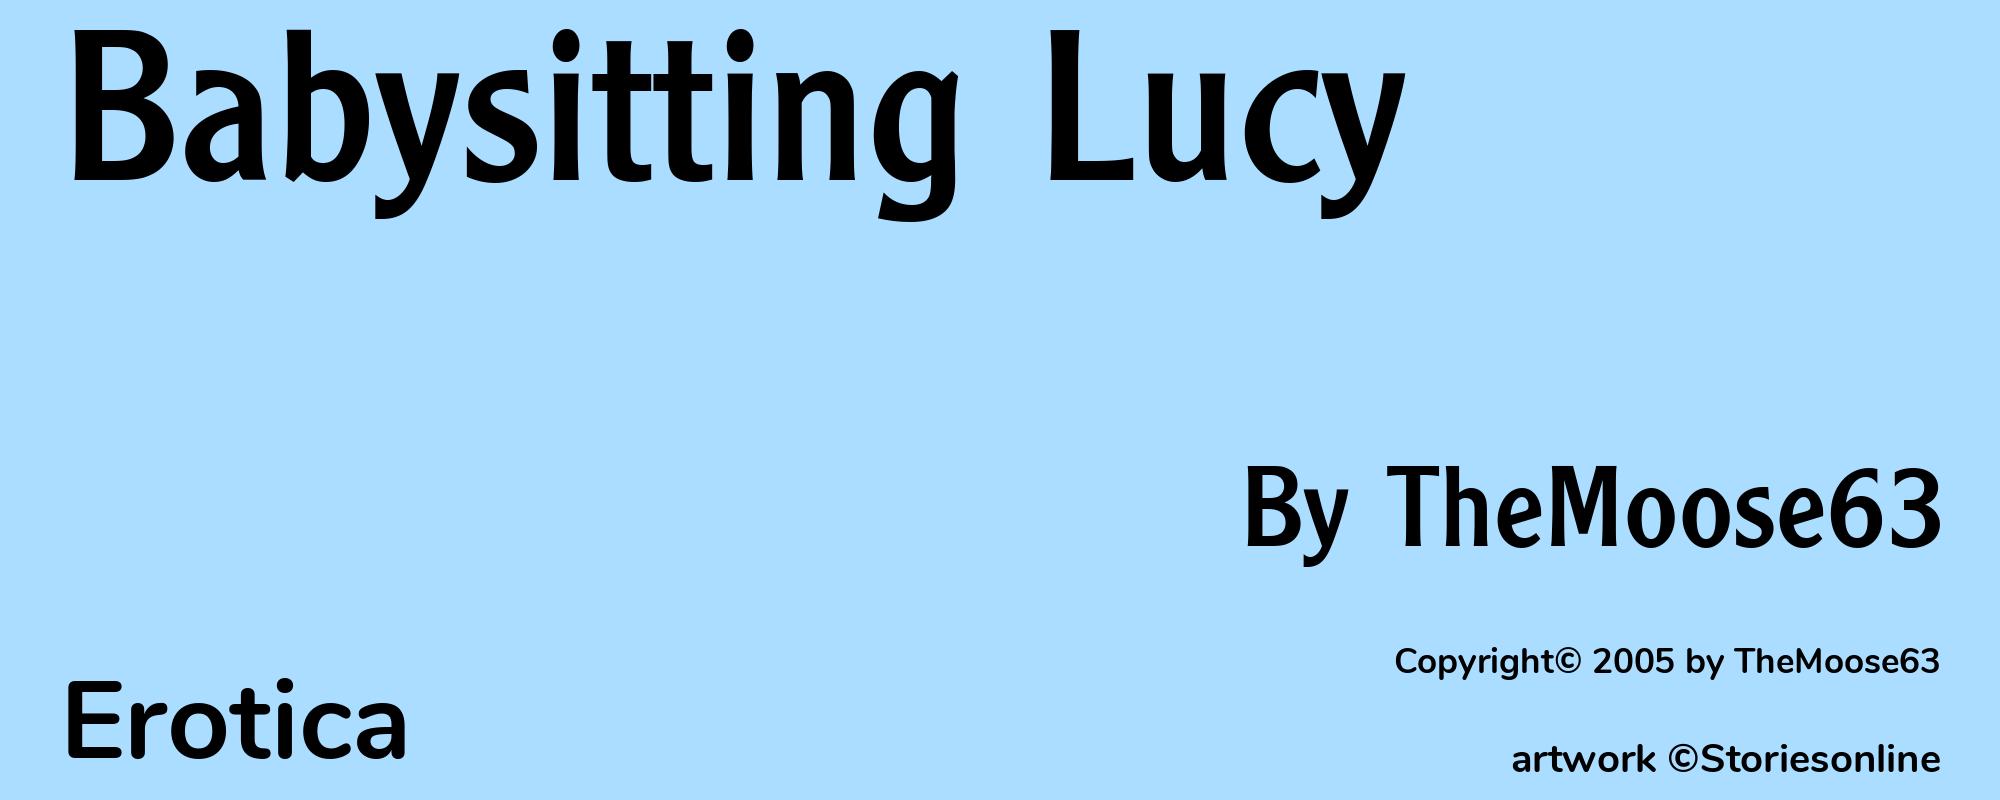 Babysitting Lucy - Cover